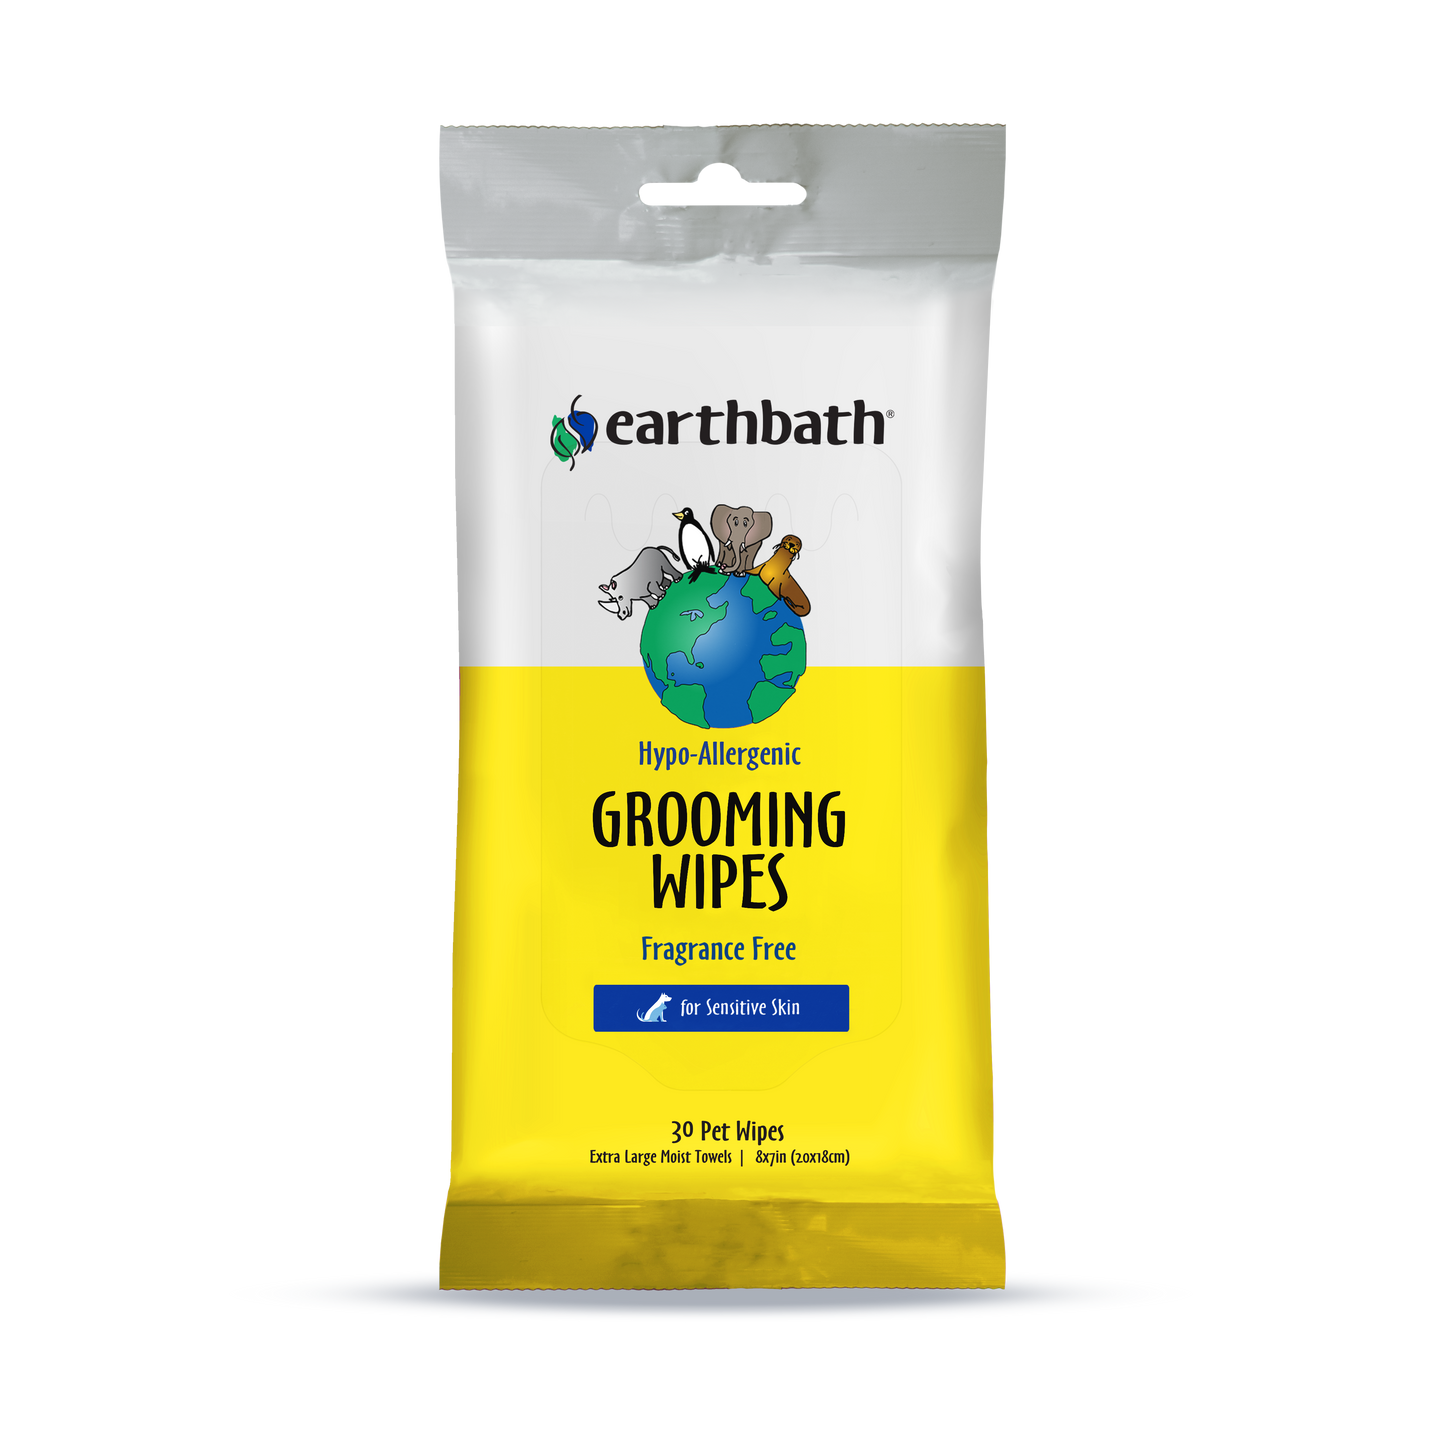 Earthbath Hypo-Allergnic Grooming Wipes